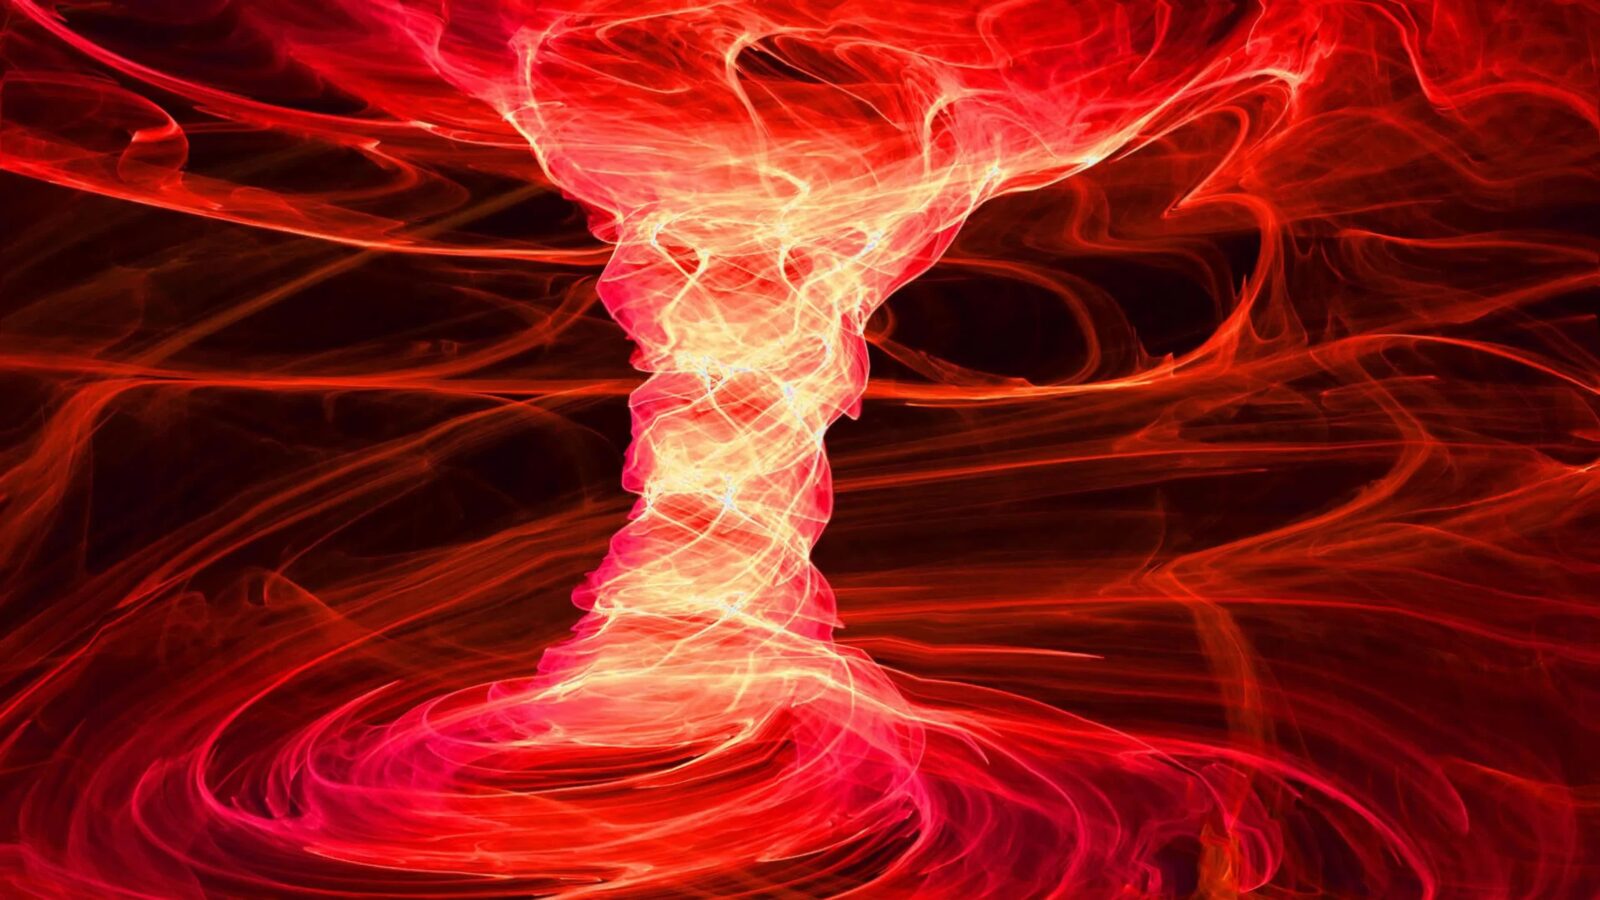 Red Fire Abstract Tornado 4K Quality - Free Live Wallpaper - Live